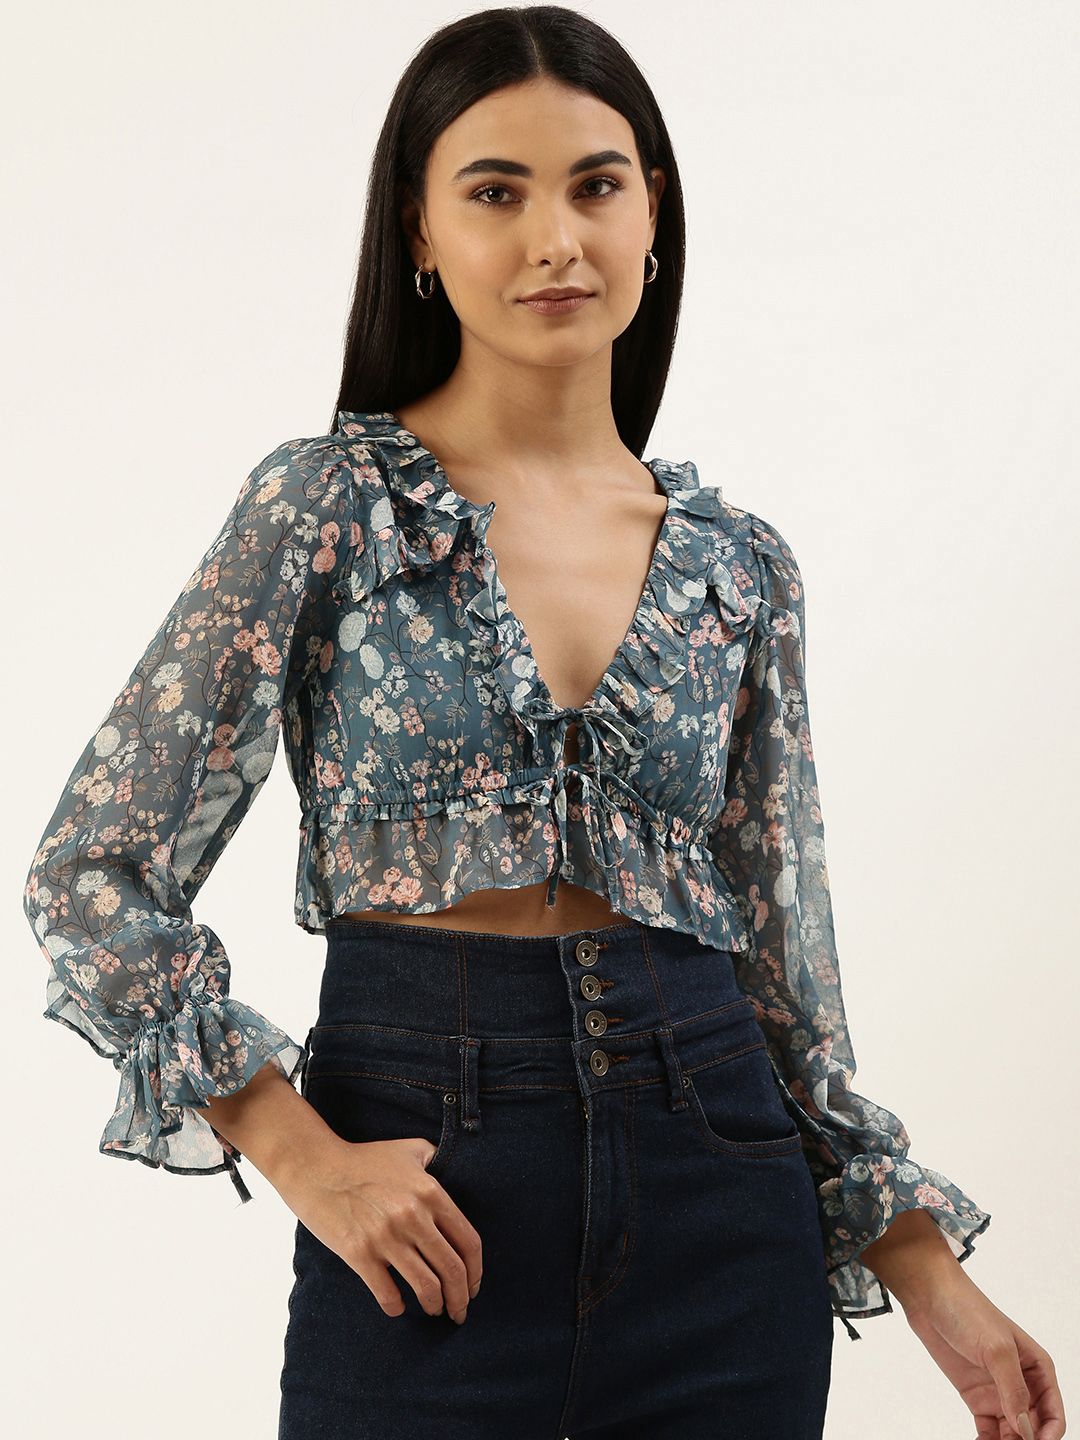 FOREVER 21 Navy Blue & Pink Floral Print Ruffles Empire Crop Top Price in India